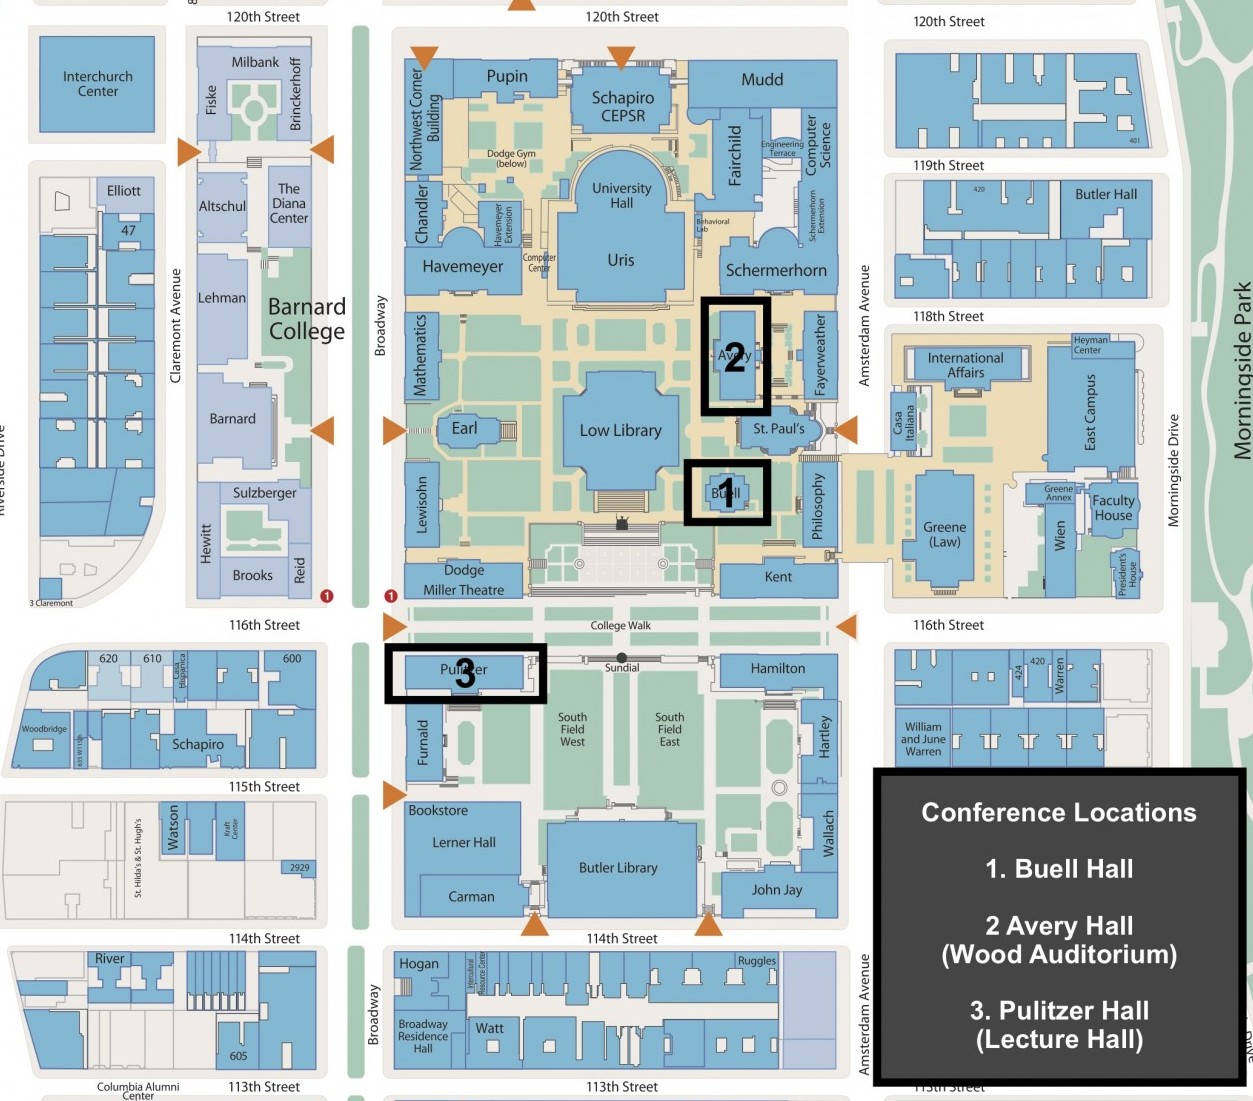 Map of Columbia's Morningside Campus with conference locations